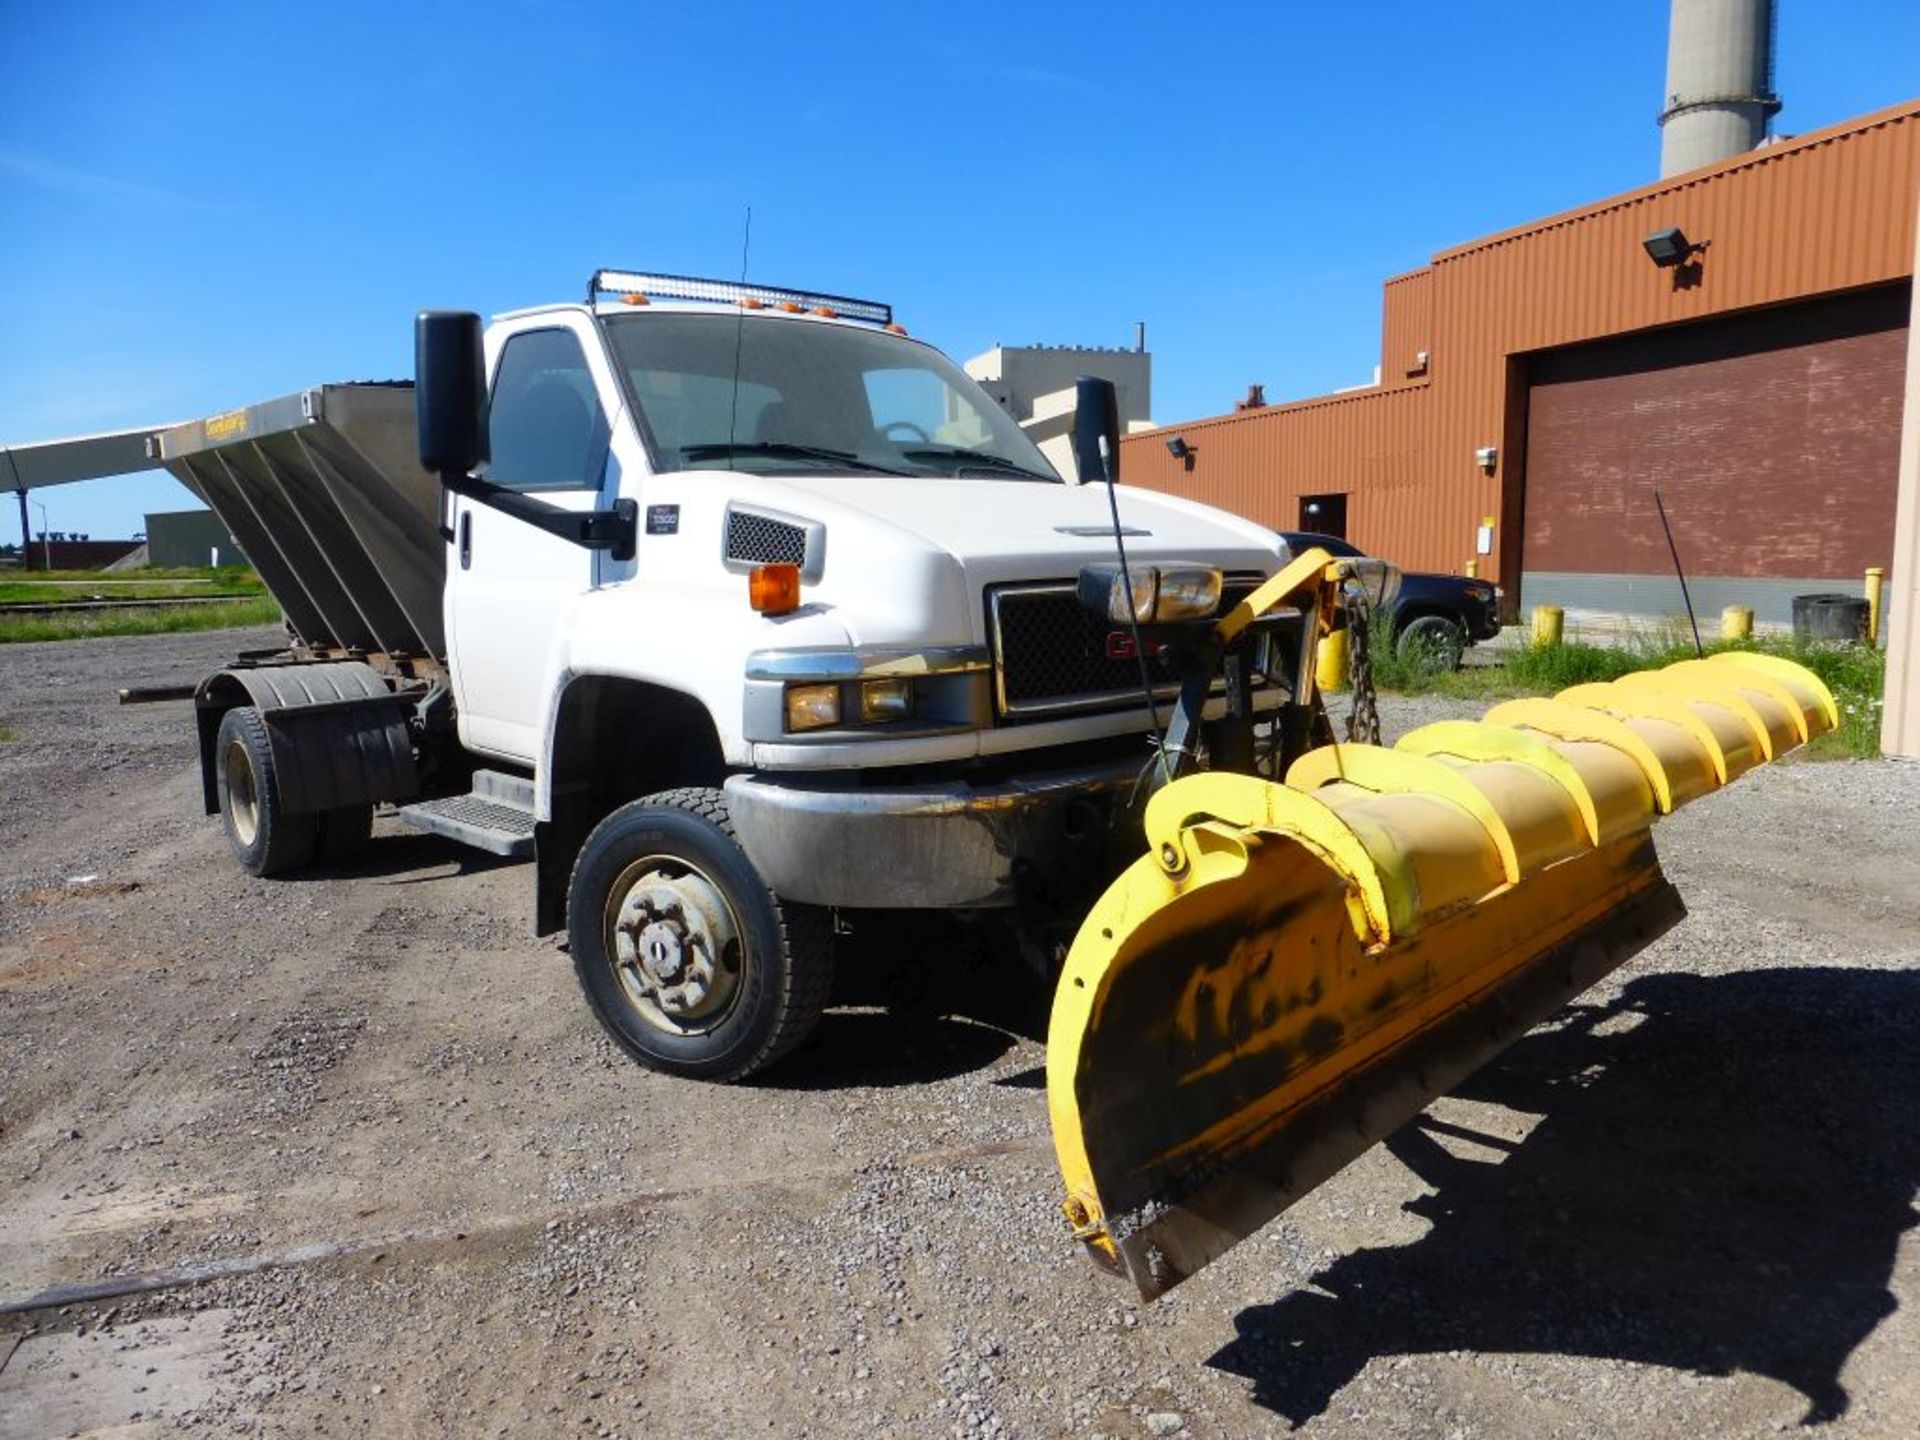 2008 GMC 5500 4x4 Plow Truck with Spreader | Vin No. 1GDE5C3G39F404627; GVWR: 19,500; 15,312 - Image 5 of 29